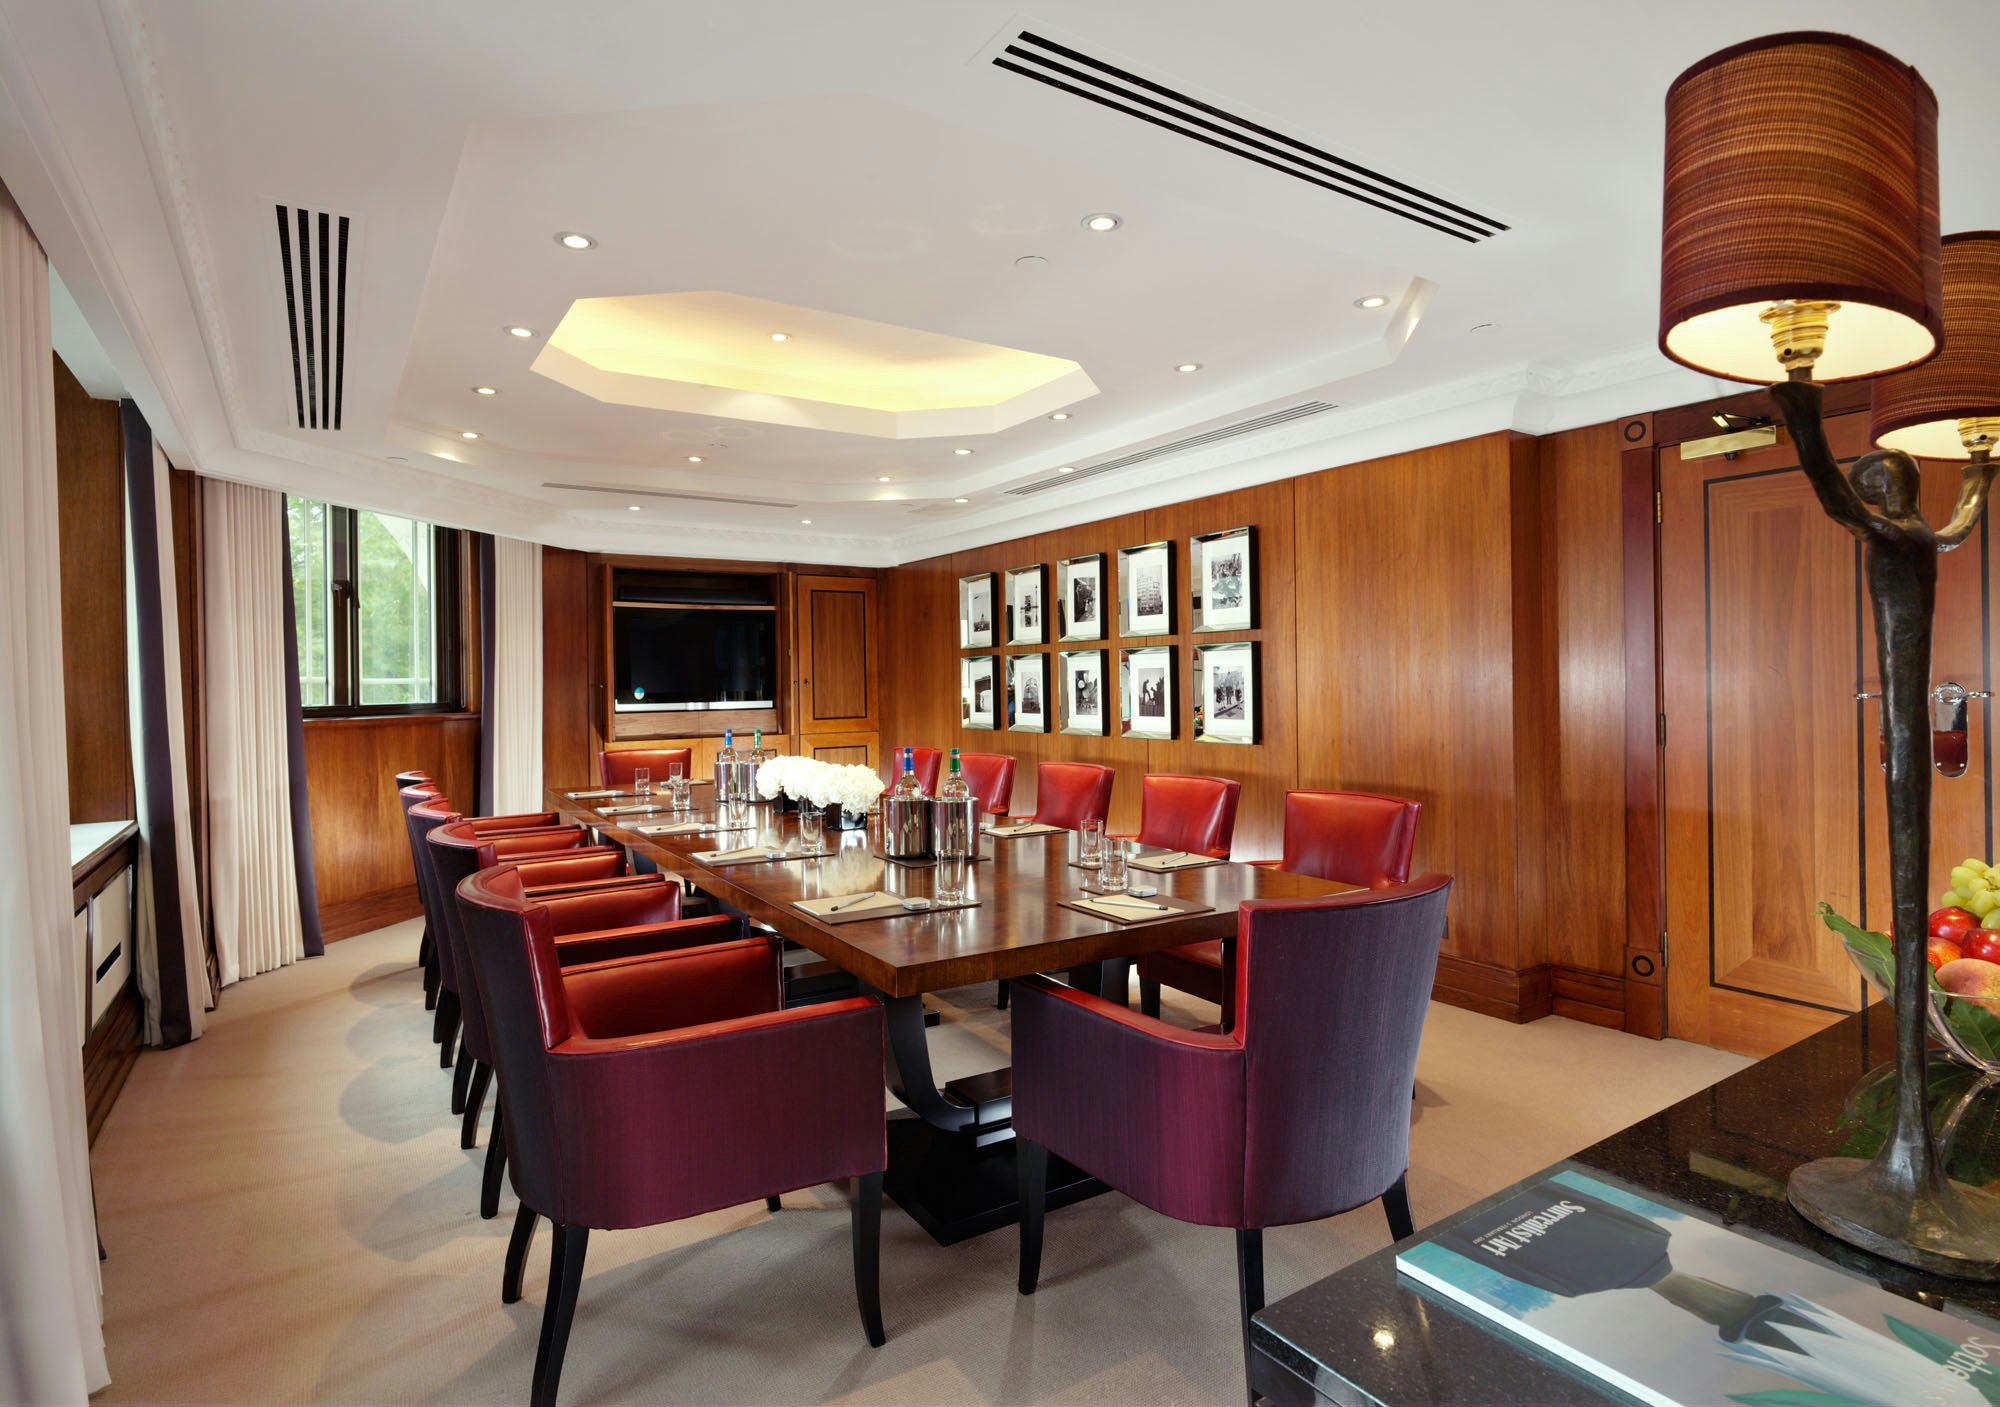 The Dorchester - Meeting rooms image 1